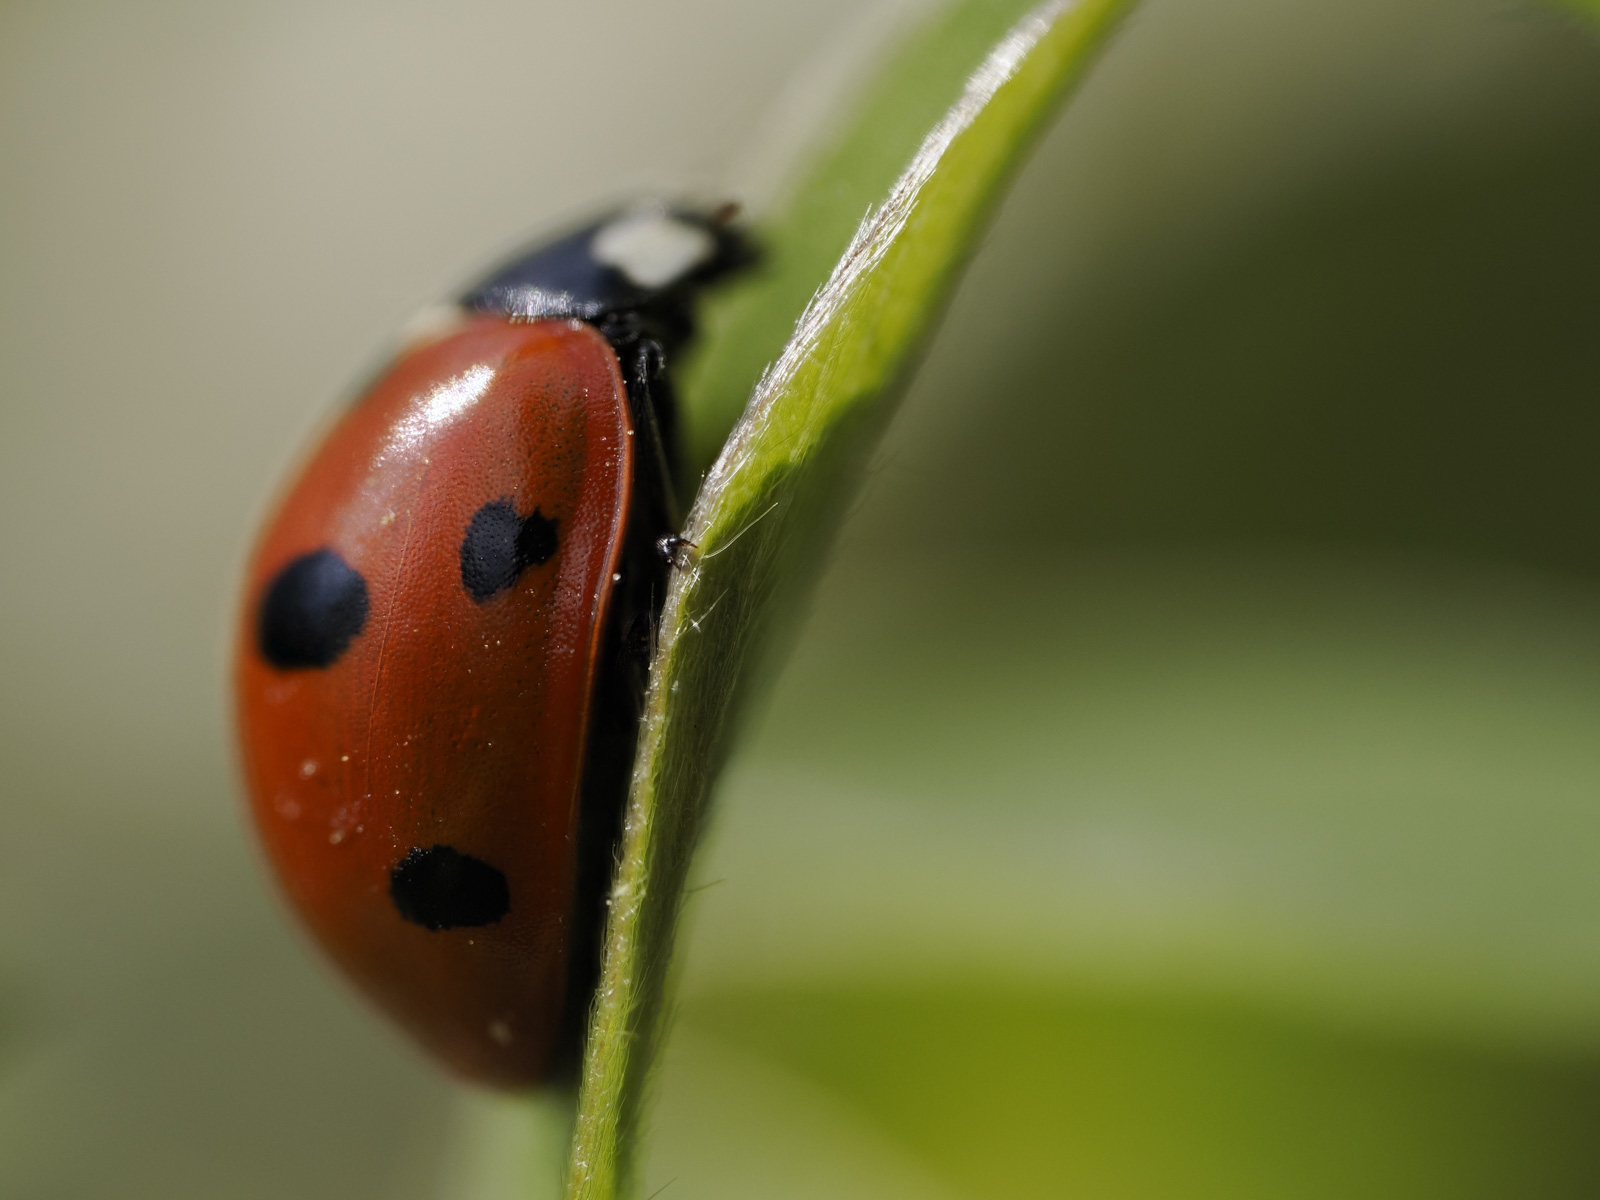 Macro photo of a ladybird on a leaf from the side